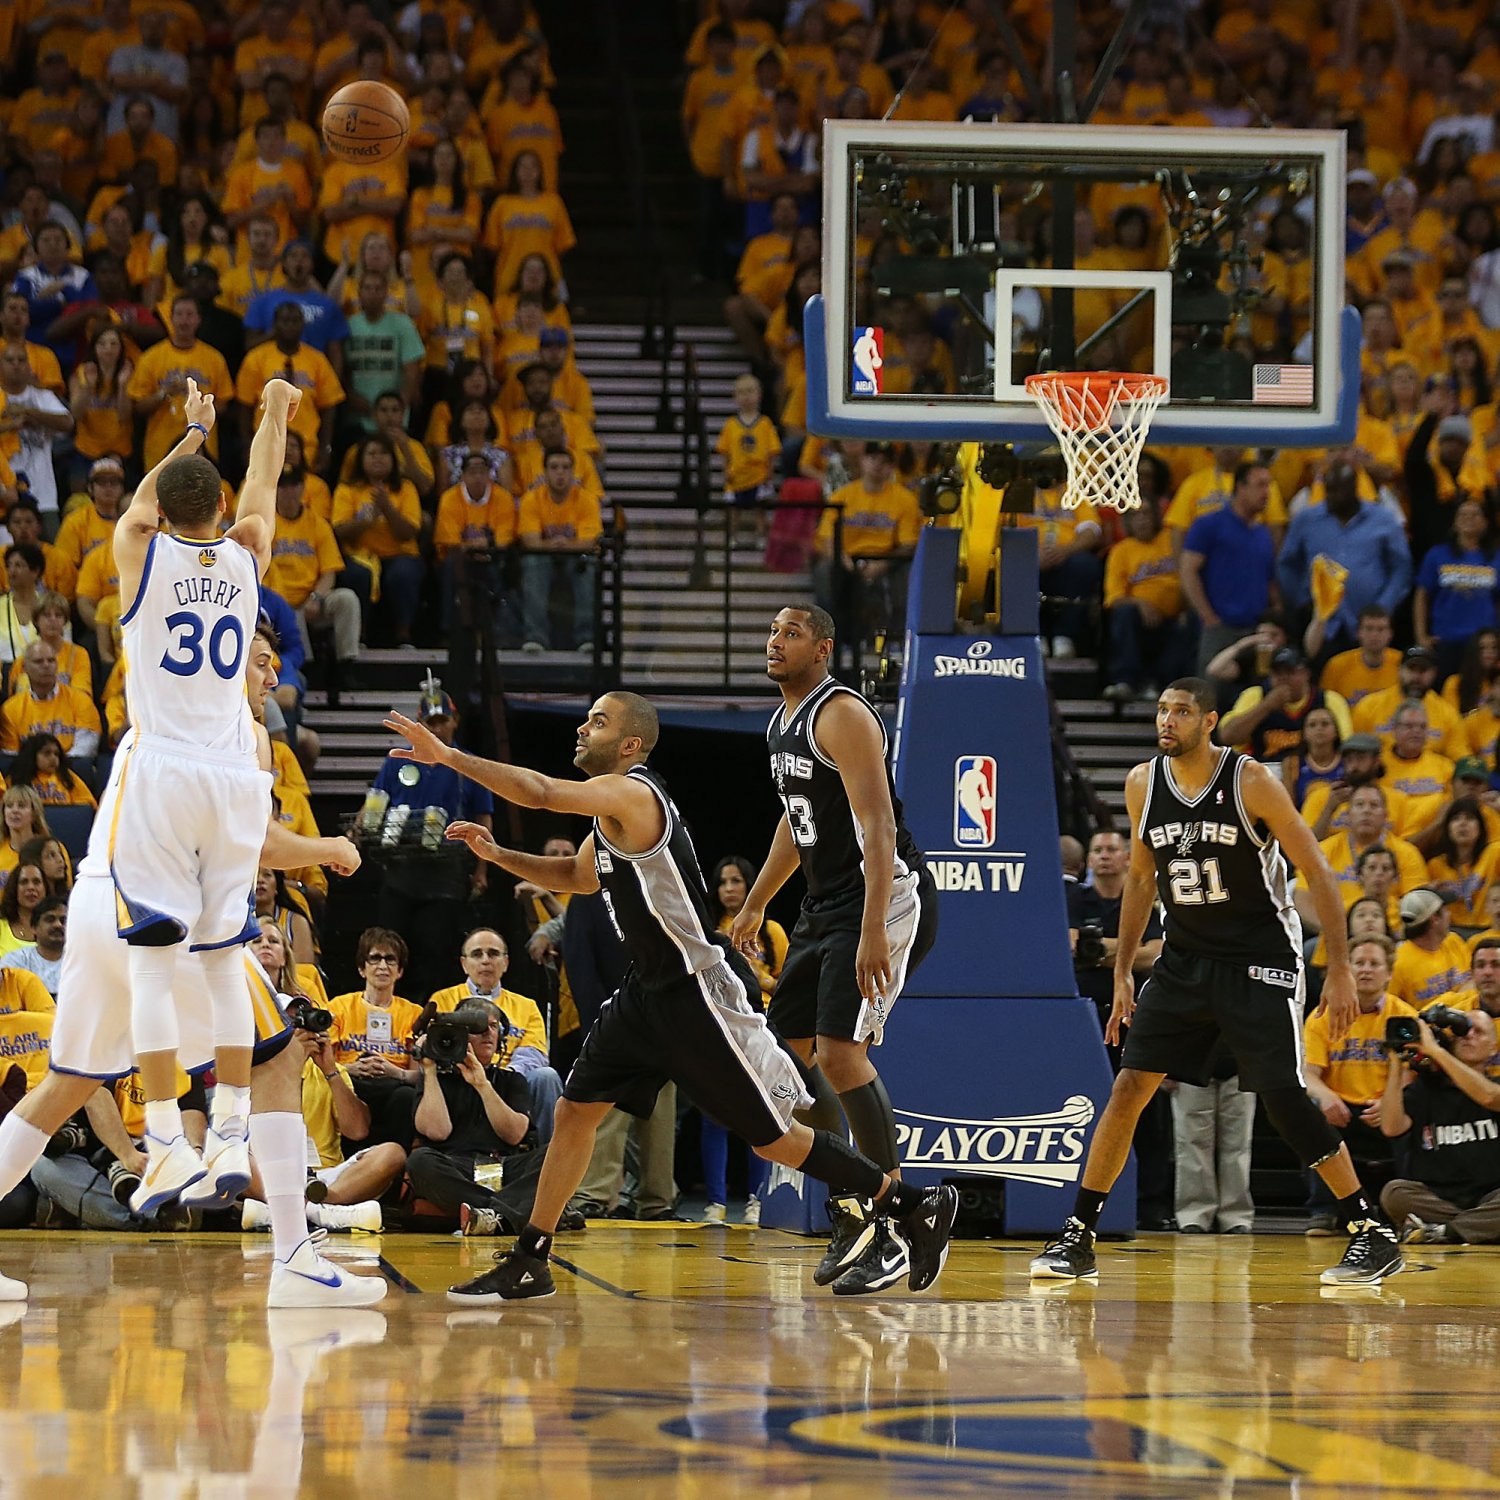 The Many Ridiculous Shots in Steph Curry #39 s Arsenal Bleacher Report